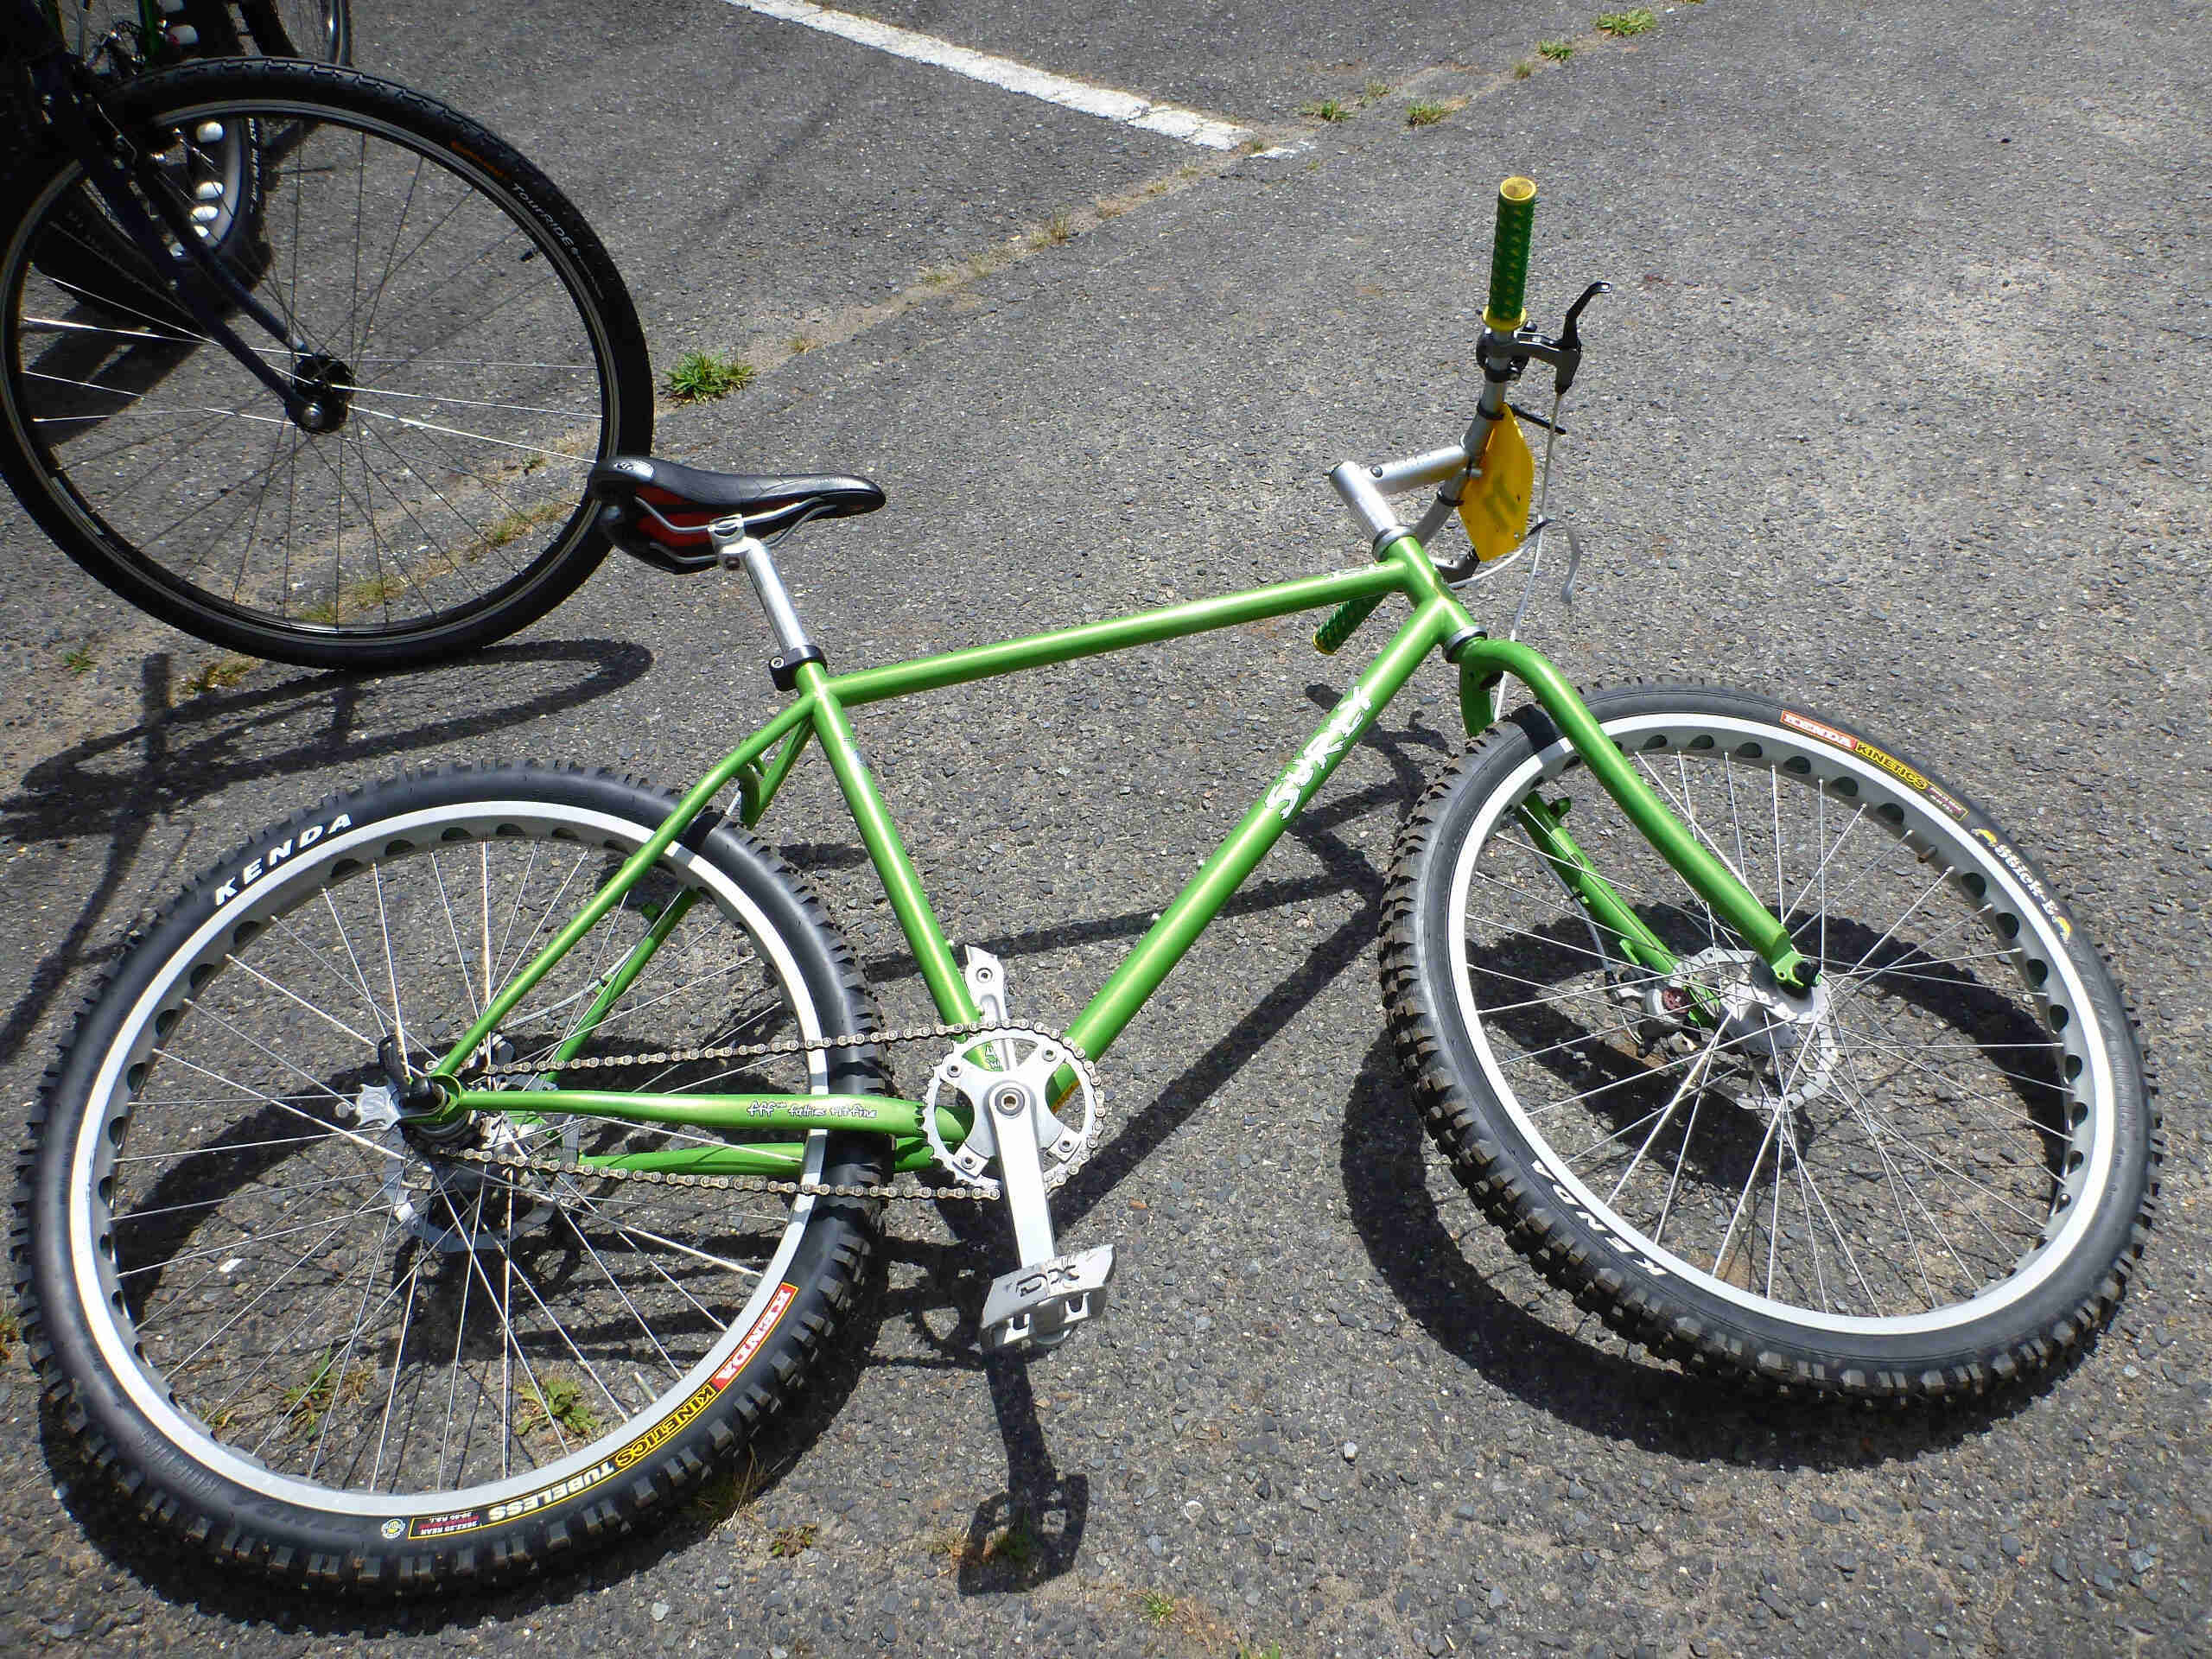 Downward, right side view of a green Surly 1x1 bike, laying on pavement